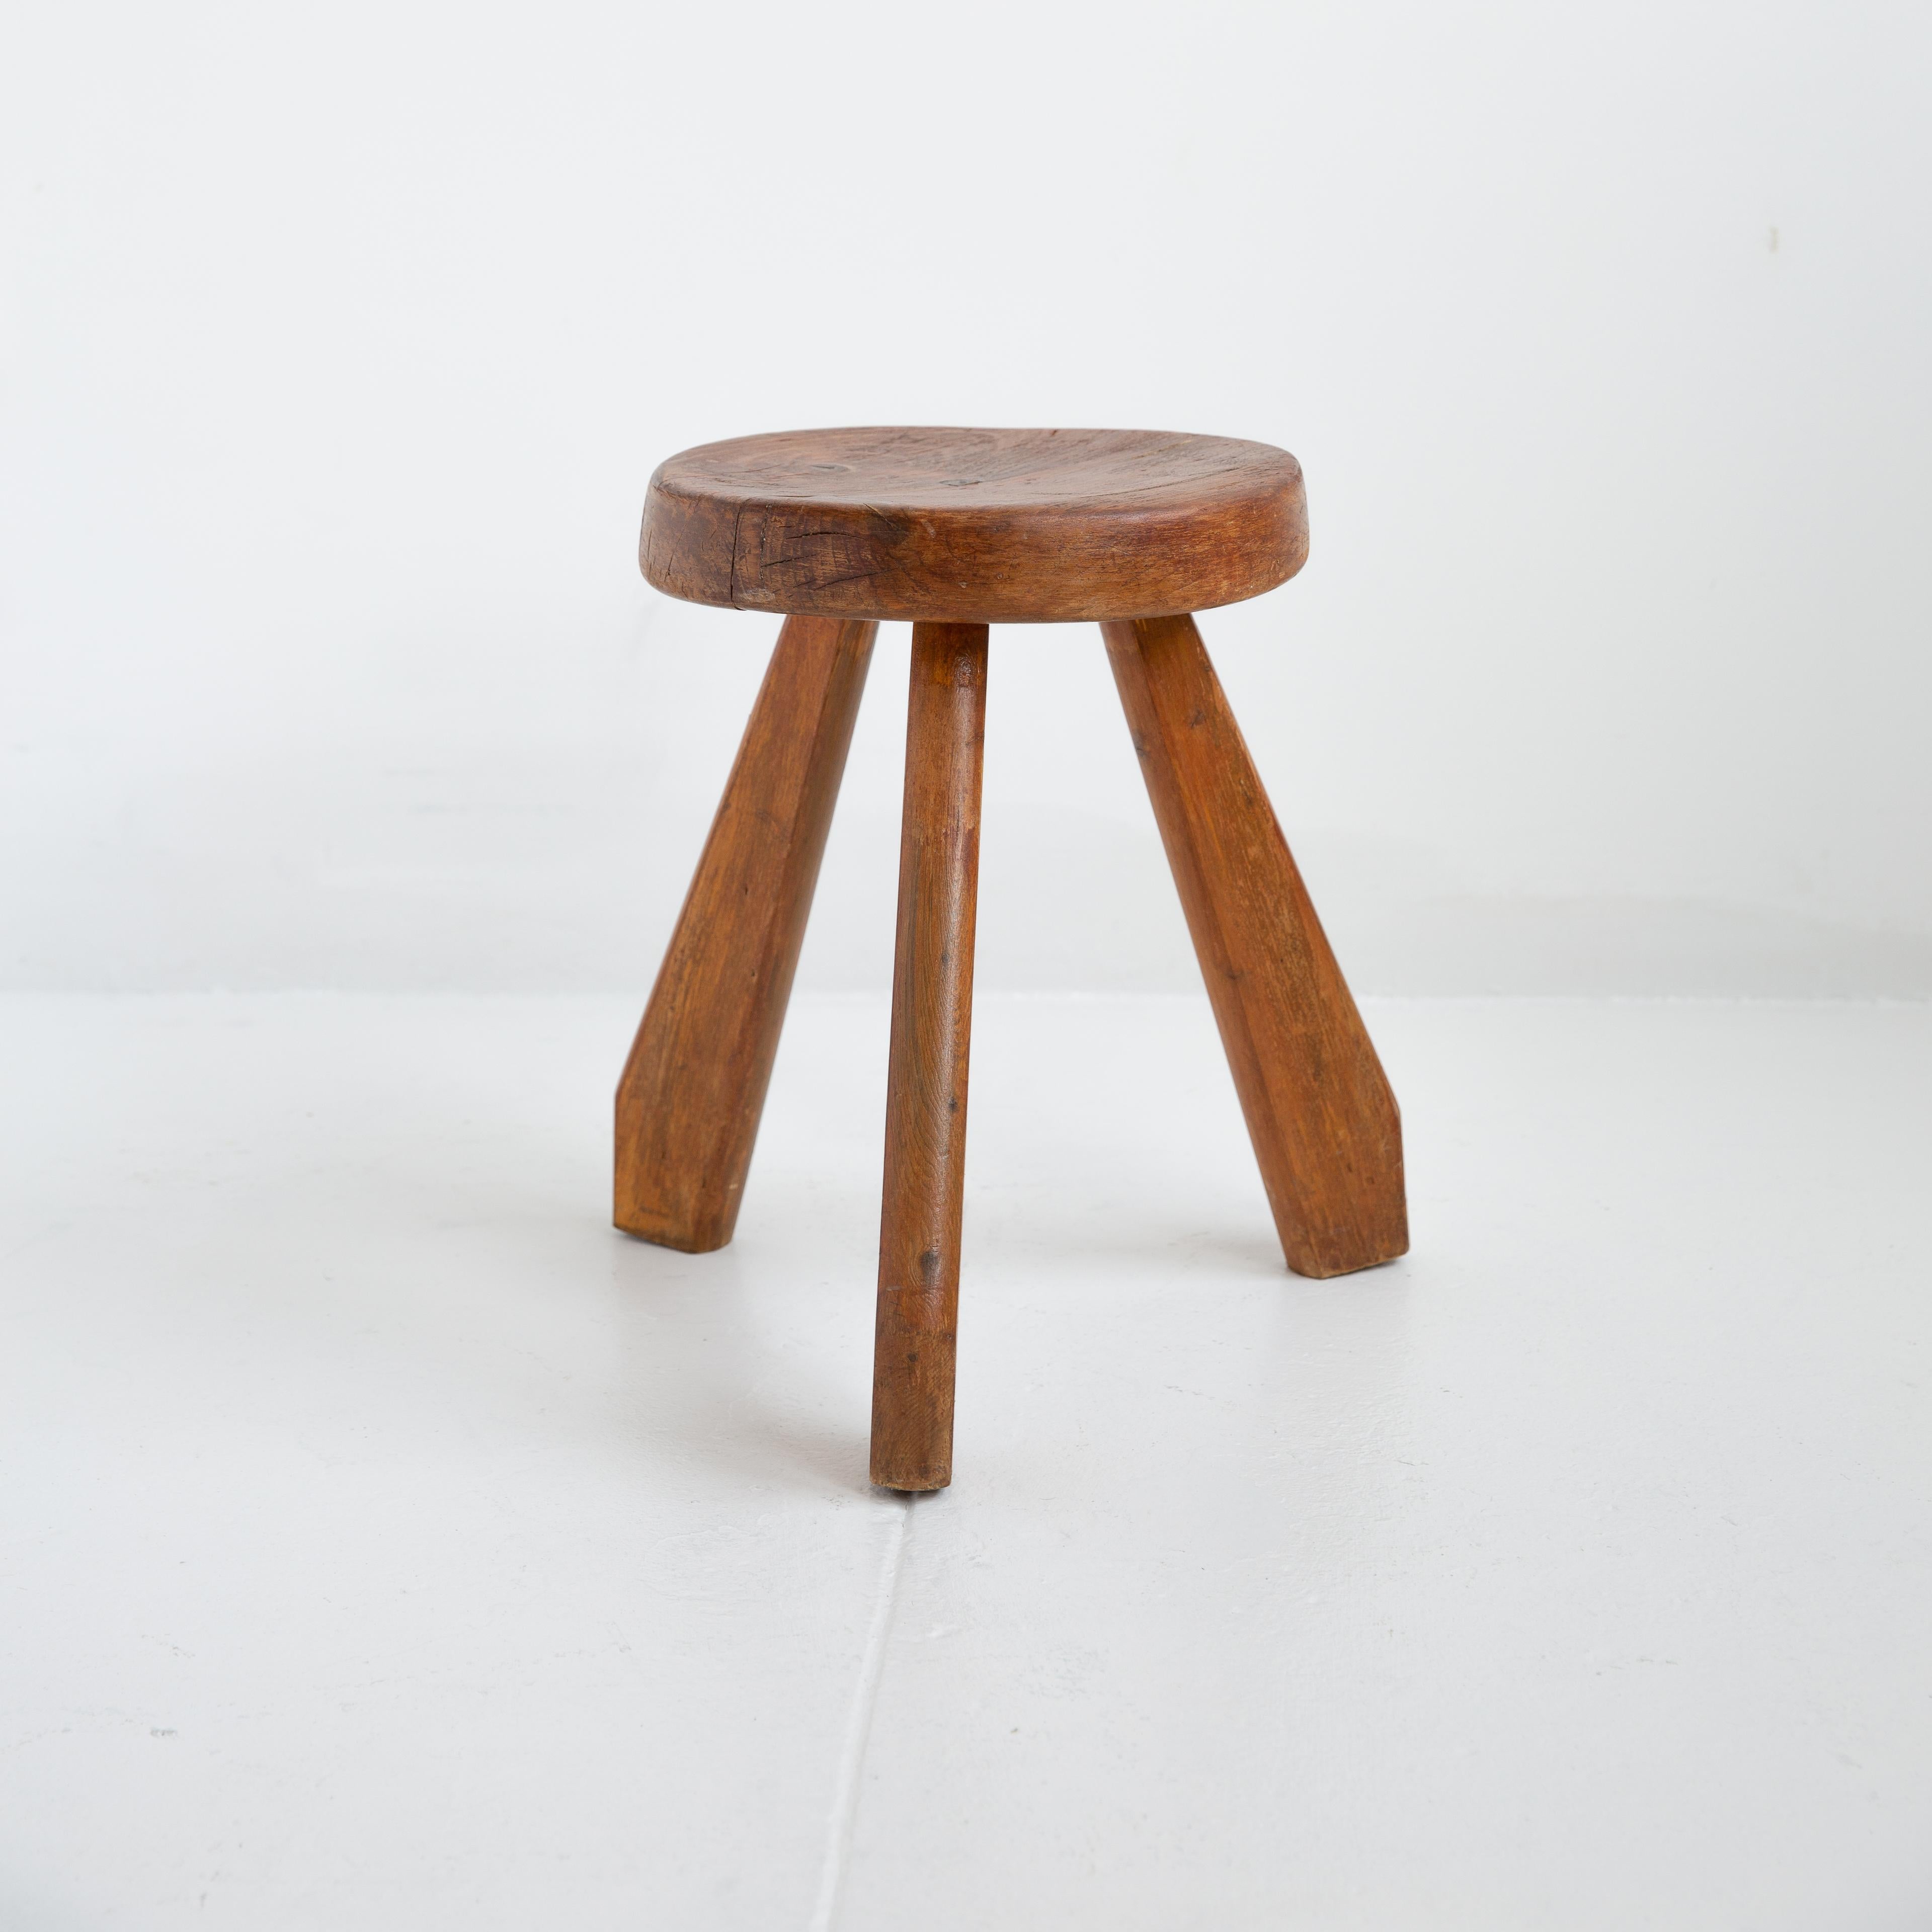 Modern Vintage Charlotte Perriand Round Dark Pine Stool for Les Arcs, 1960s, France For Sale